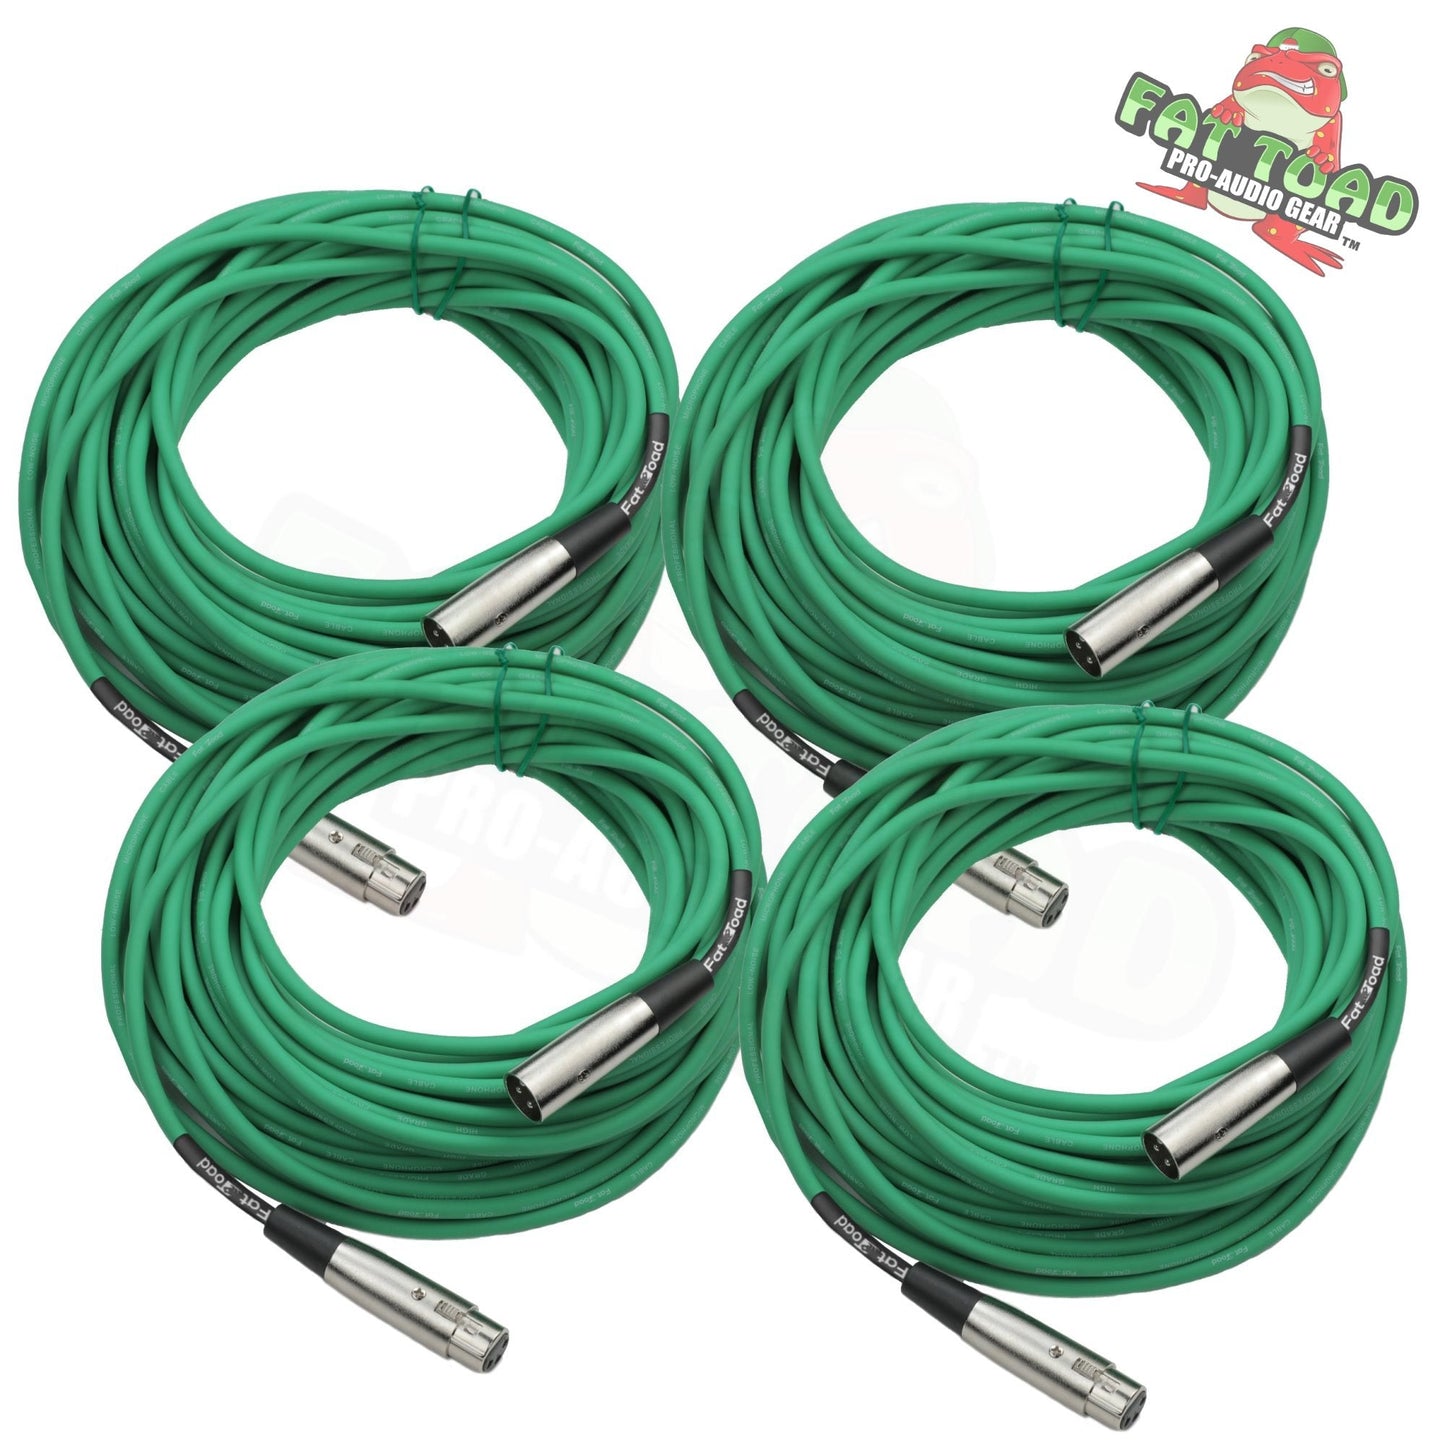 XLR Microphone Cables (4 Pack) by FAT TOAD - 50ft Professional Pro Audio Green Mic Cord Extension Patch with Lo-Z Connector - 24 AWG Shielded Wire